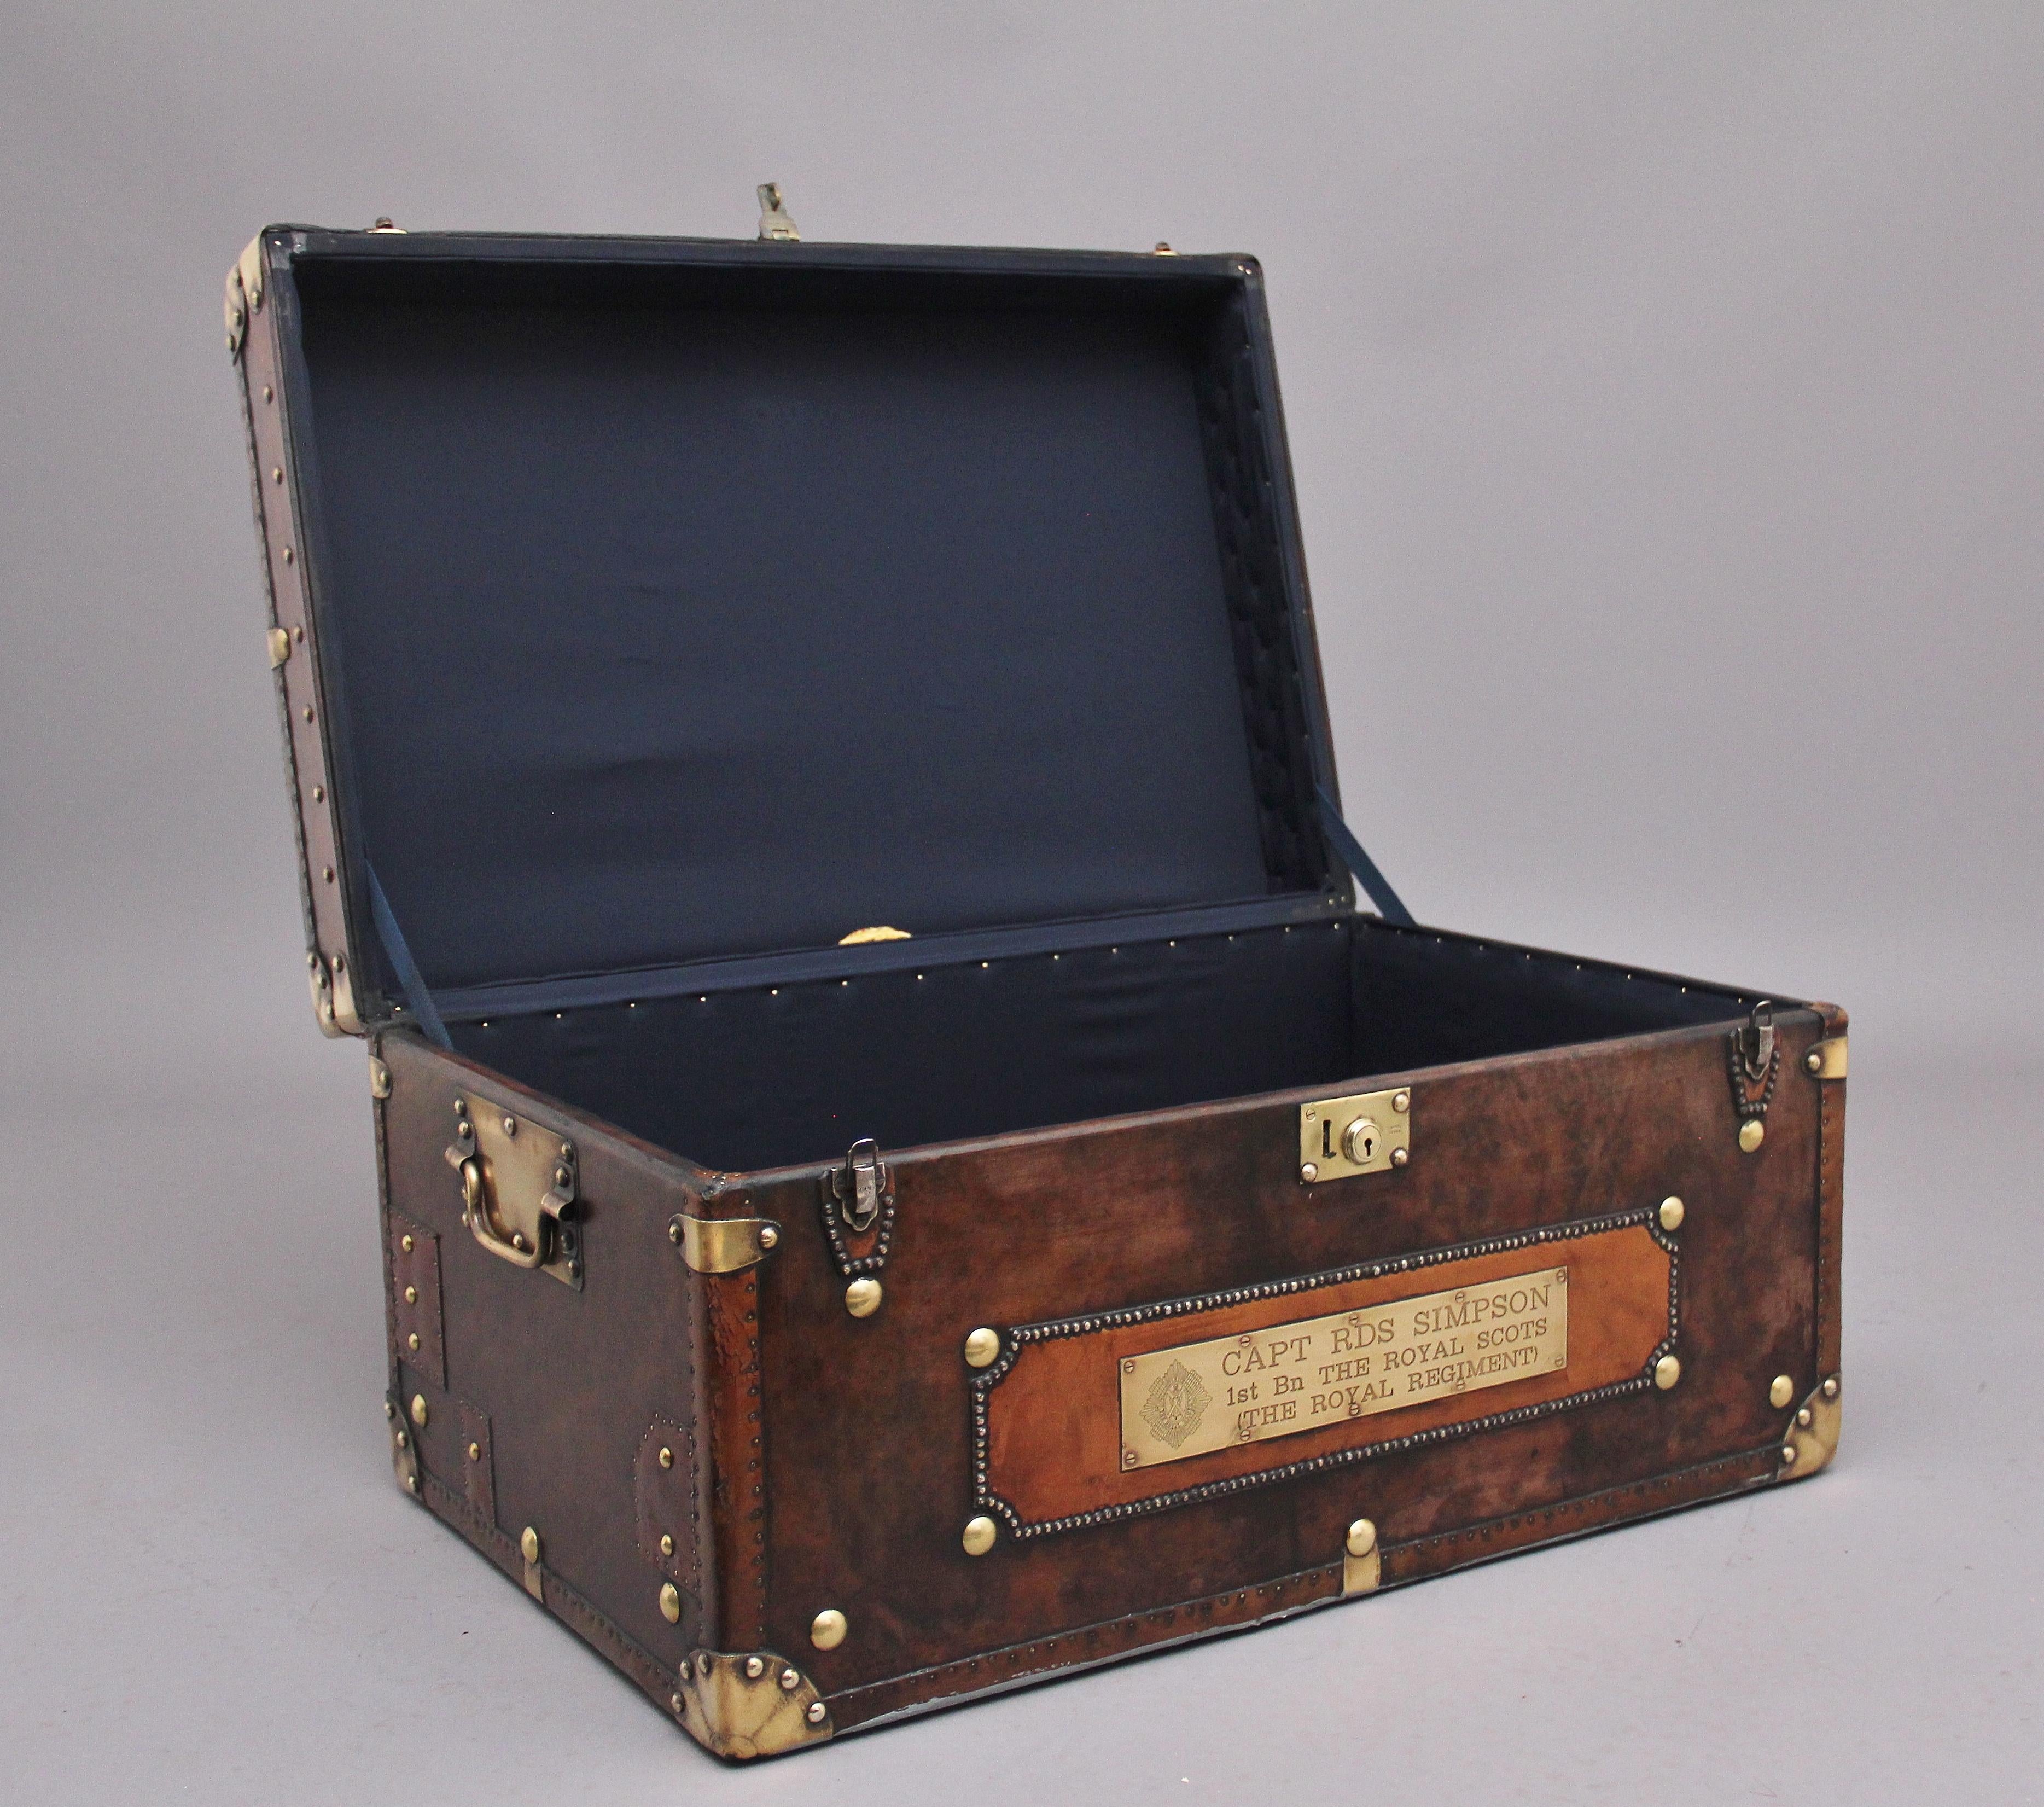 An early 20th century leather bound ex army trunk with brass straps and corners, copper studs and brass carrying handles on the sides, the trunk opens to reveal a nice dark blue lined interior, on the front of the trunk there is a brass plaque which